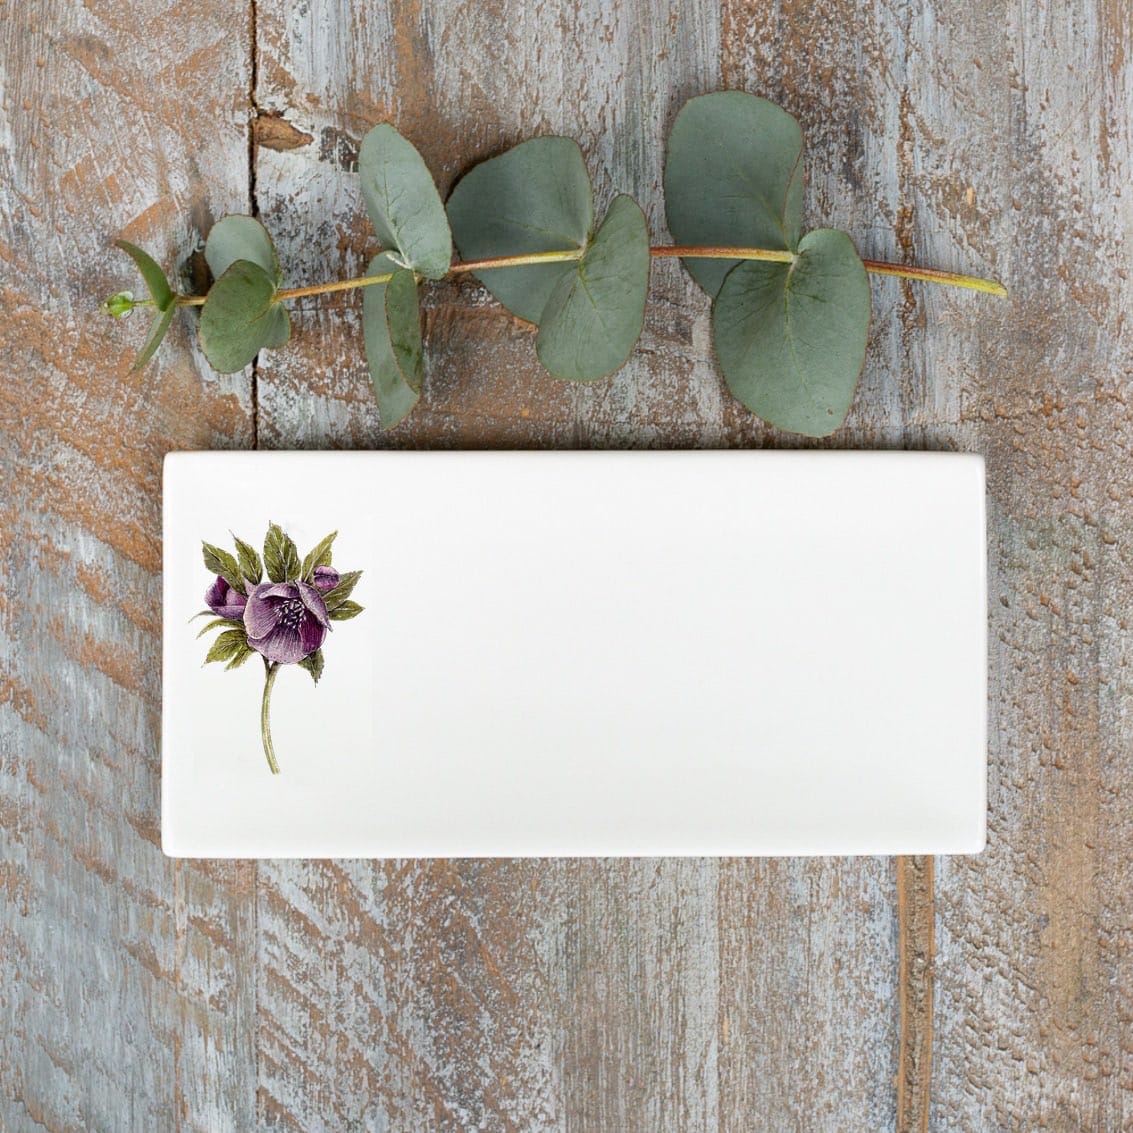 White rectangular soap dish with an illustration of a hellebore flower, photographed birds-eye view on a wooden surface